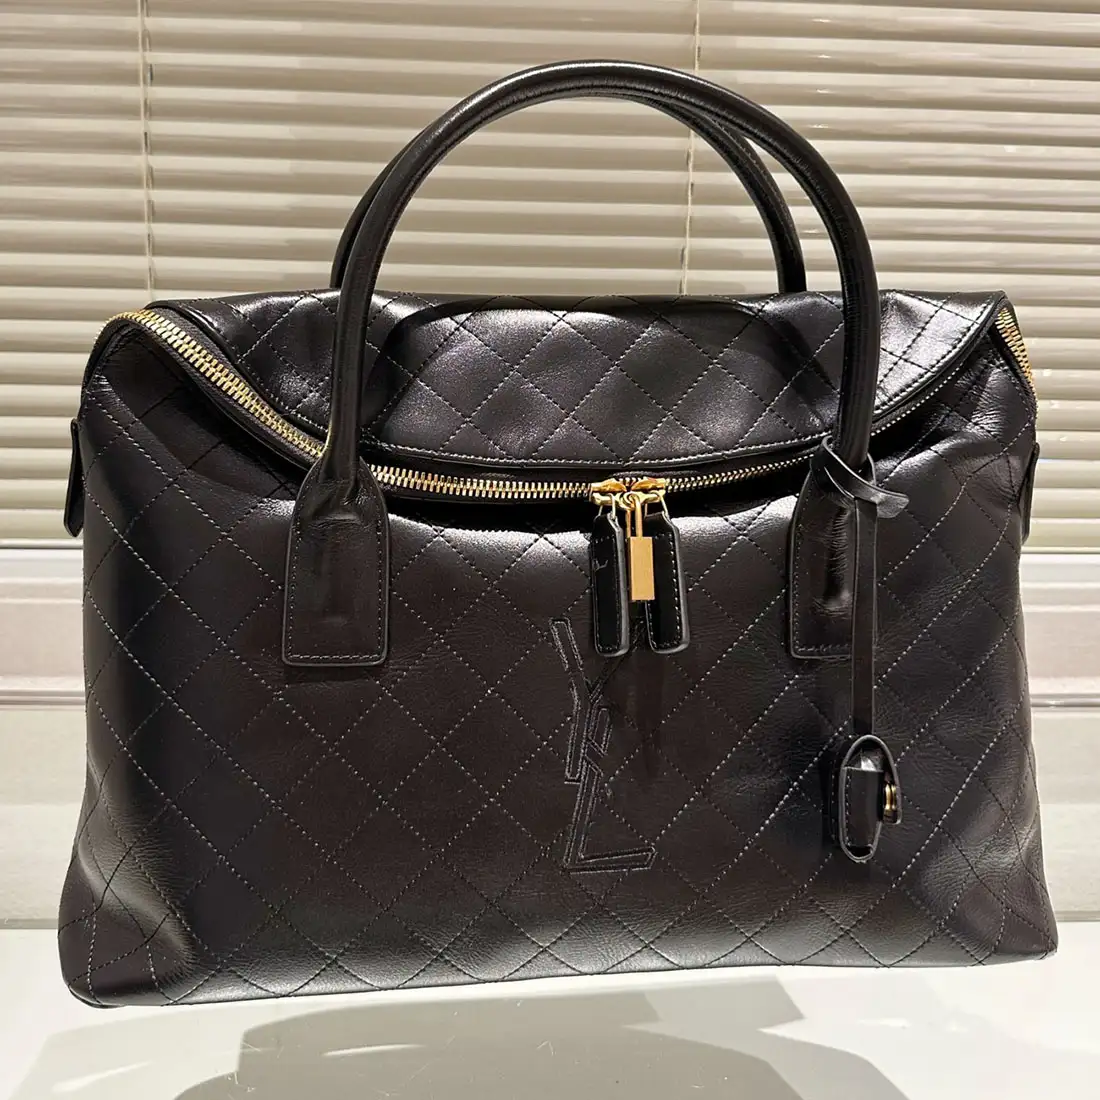 Star style quilted leather travel bag